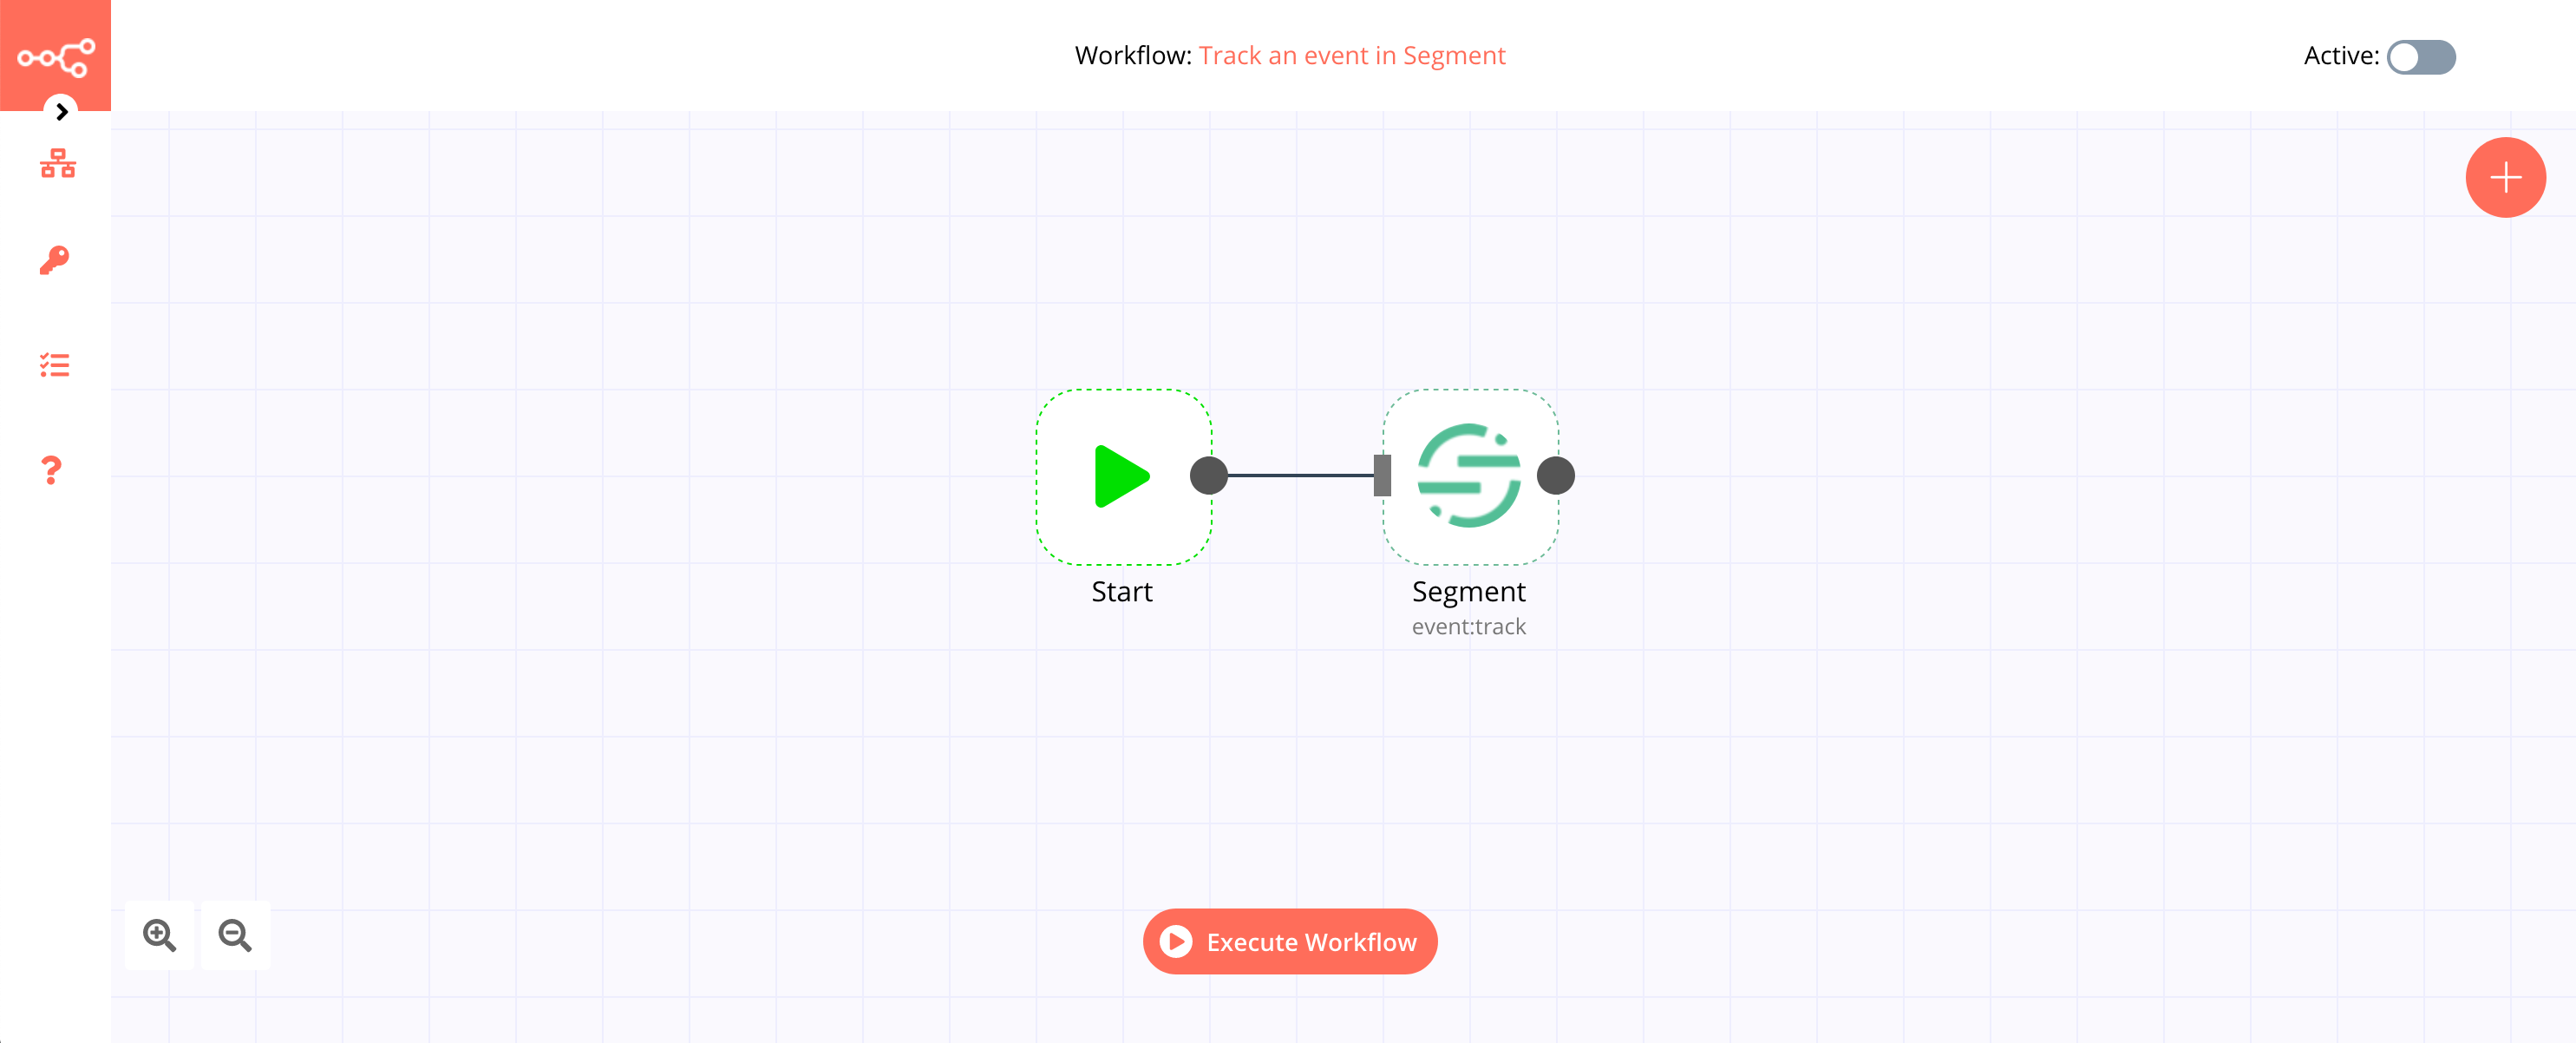 A workflow with the Segment node